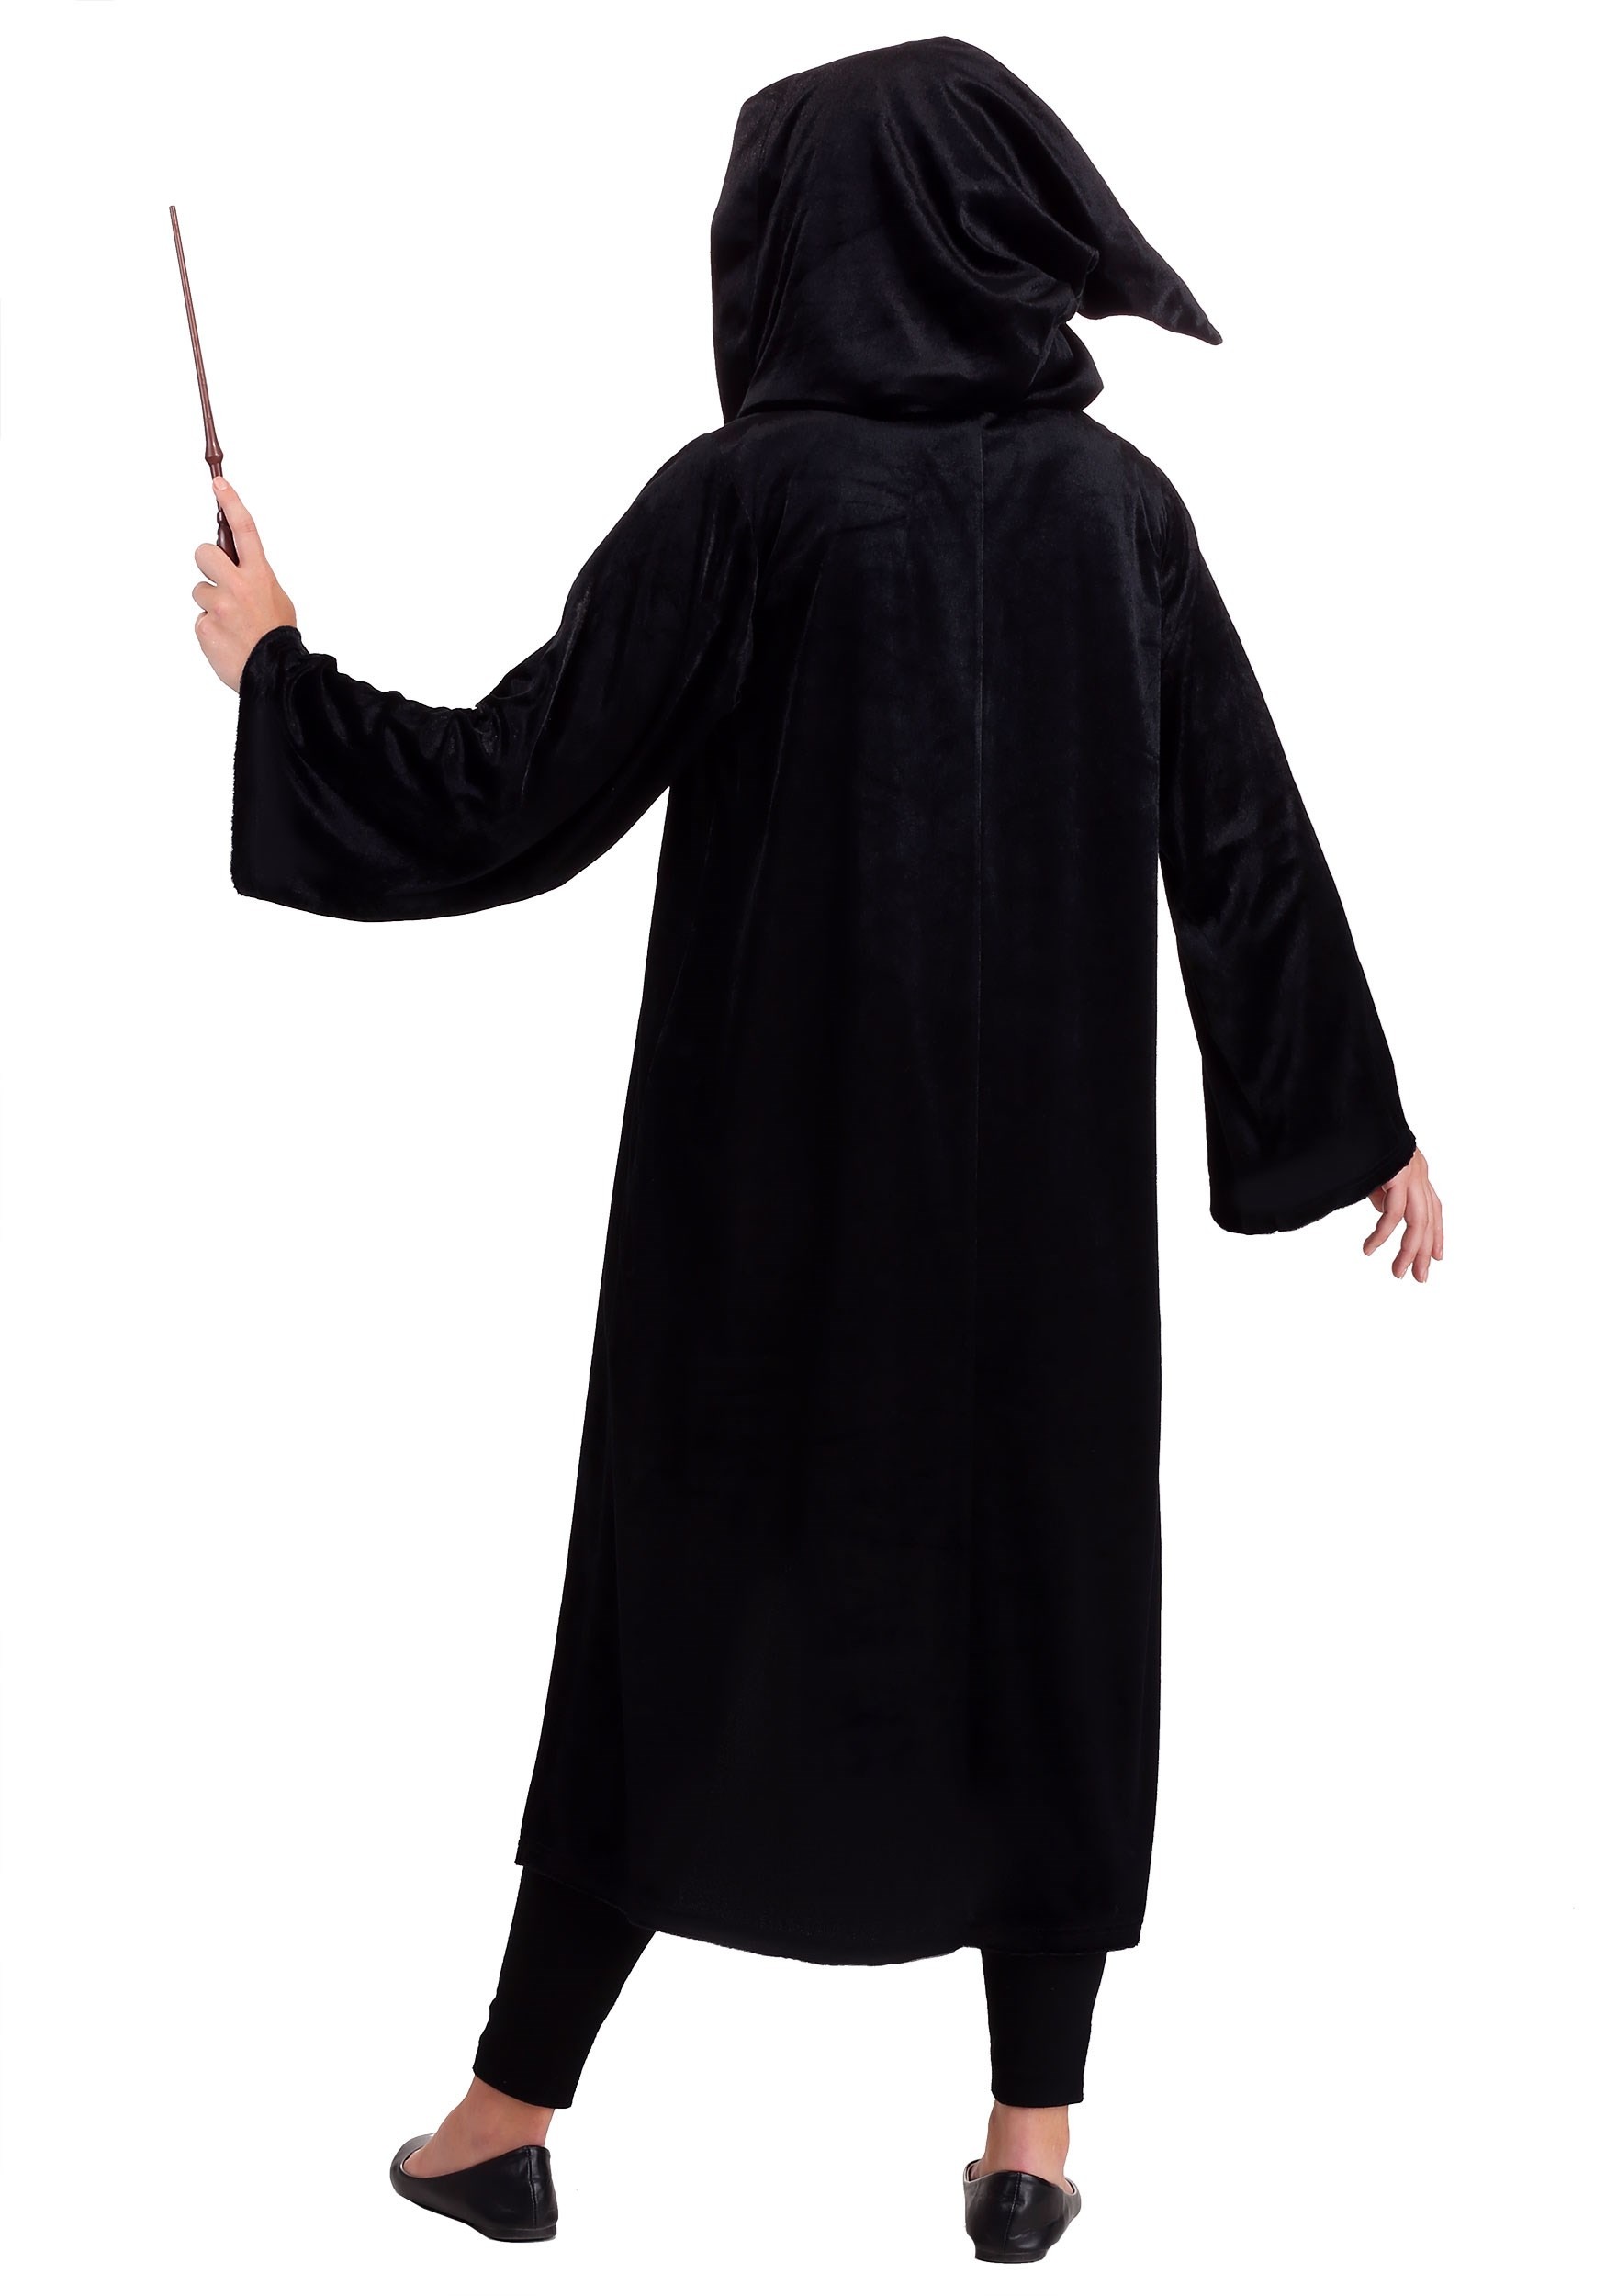 Adult Harry Potter Deluxe Ravenclaw Robe Costume